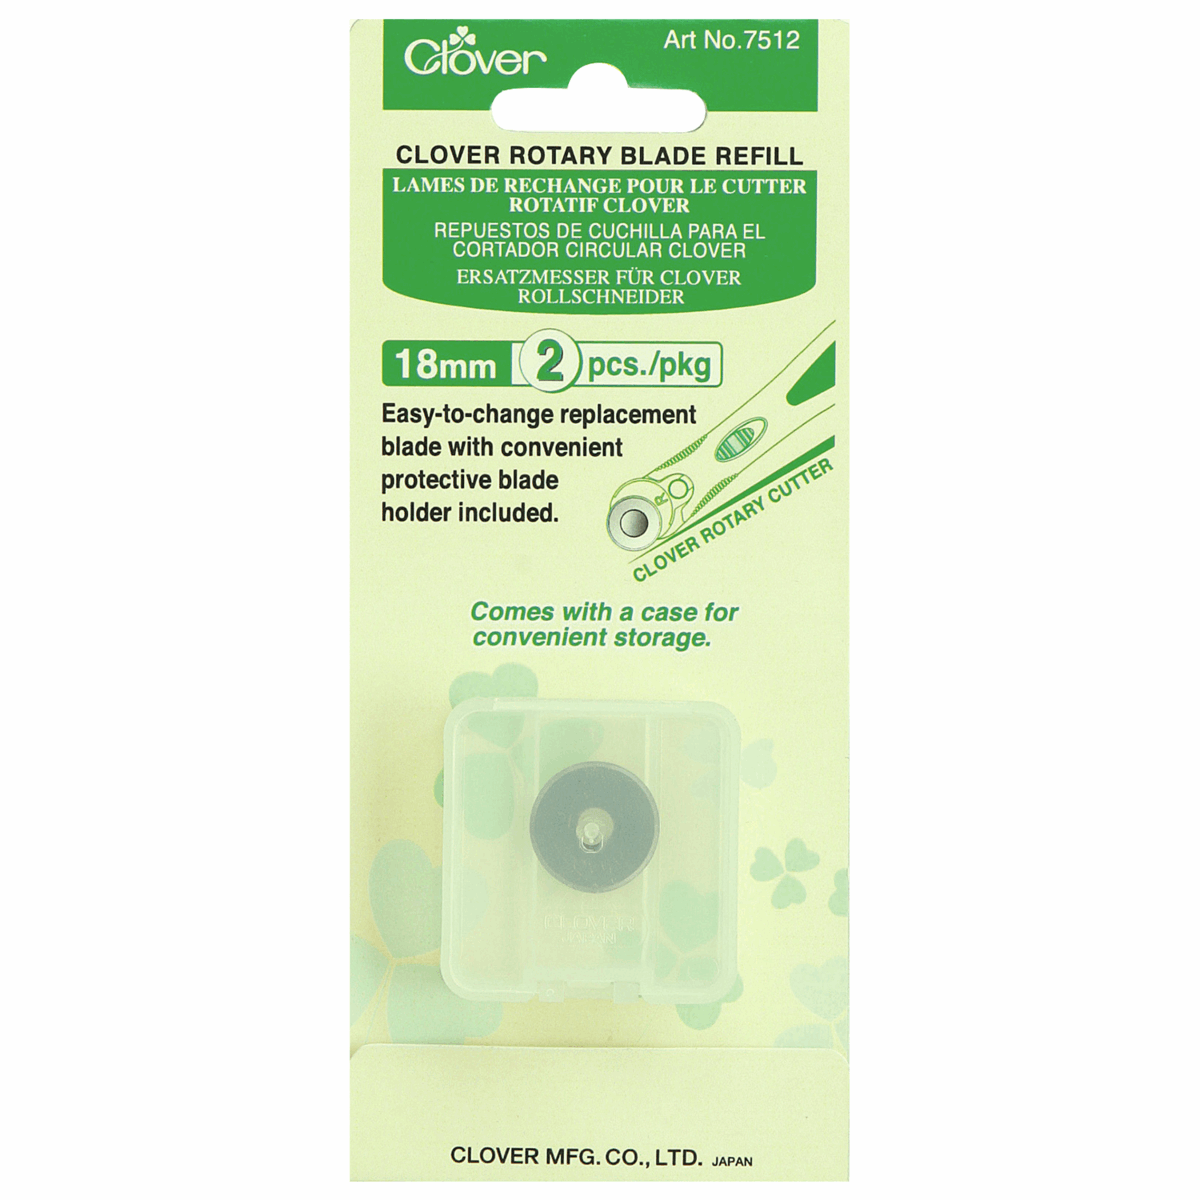 Clover Rotary Cutter Blades from Jaycotts Sewing Supplies